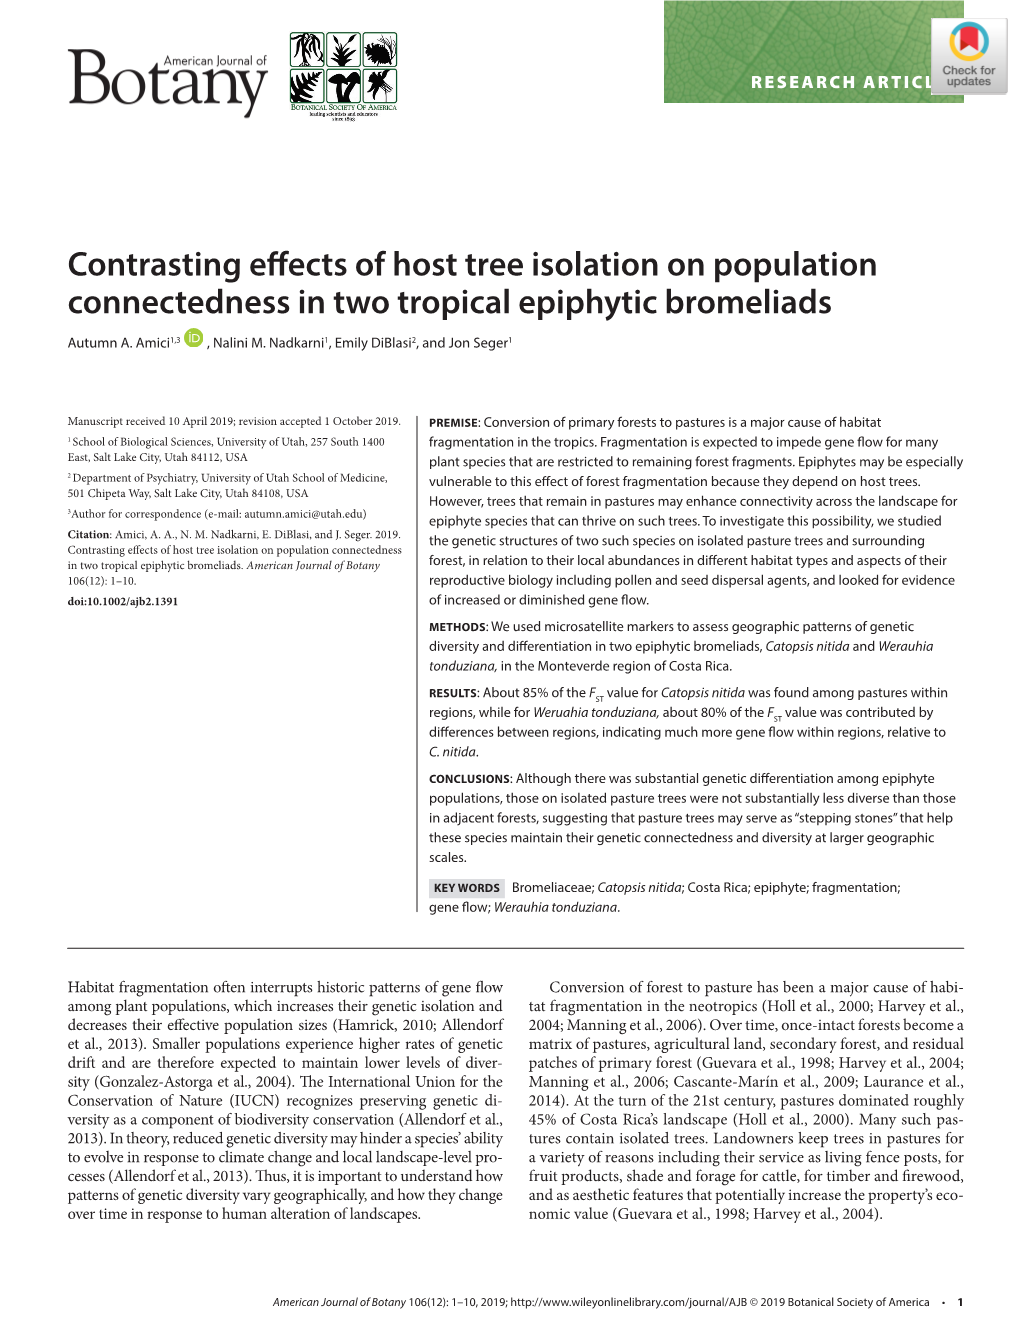 Contrasting Effects of Host Tree Isolation on Population Connectedness in Two Tropical Epiphytic Bromeliads